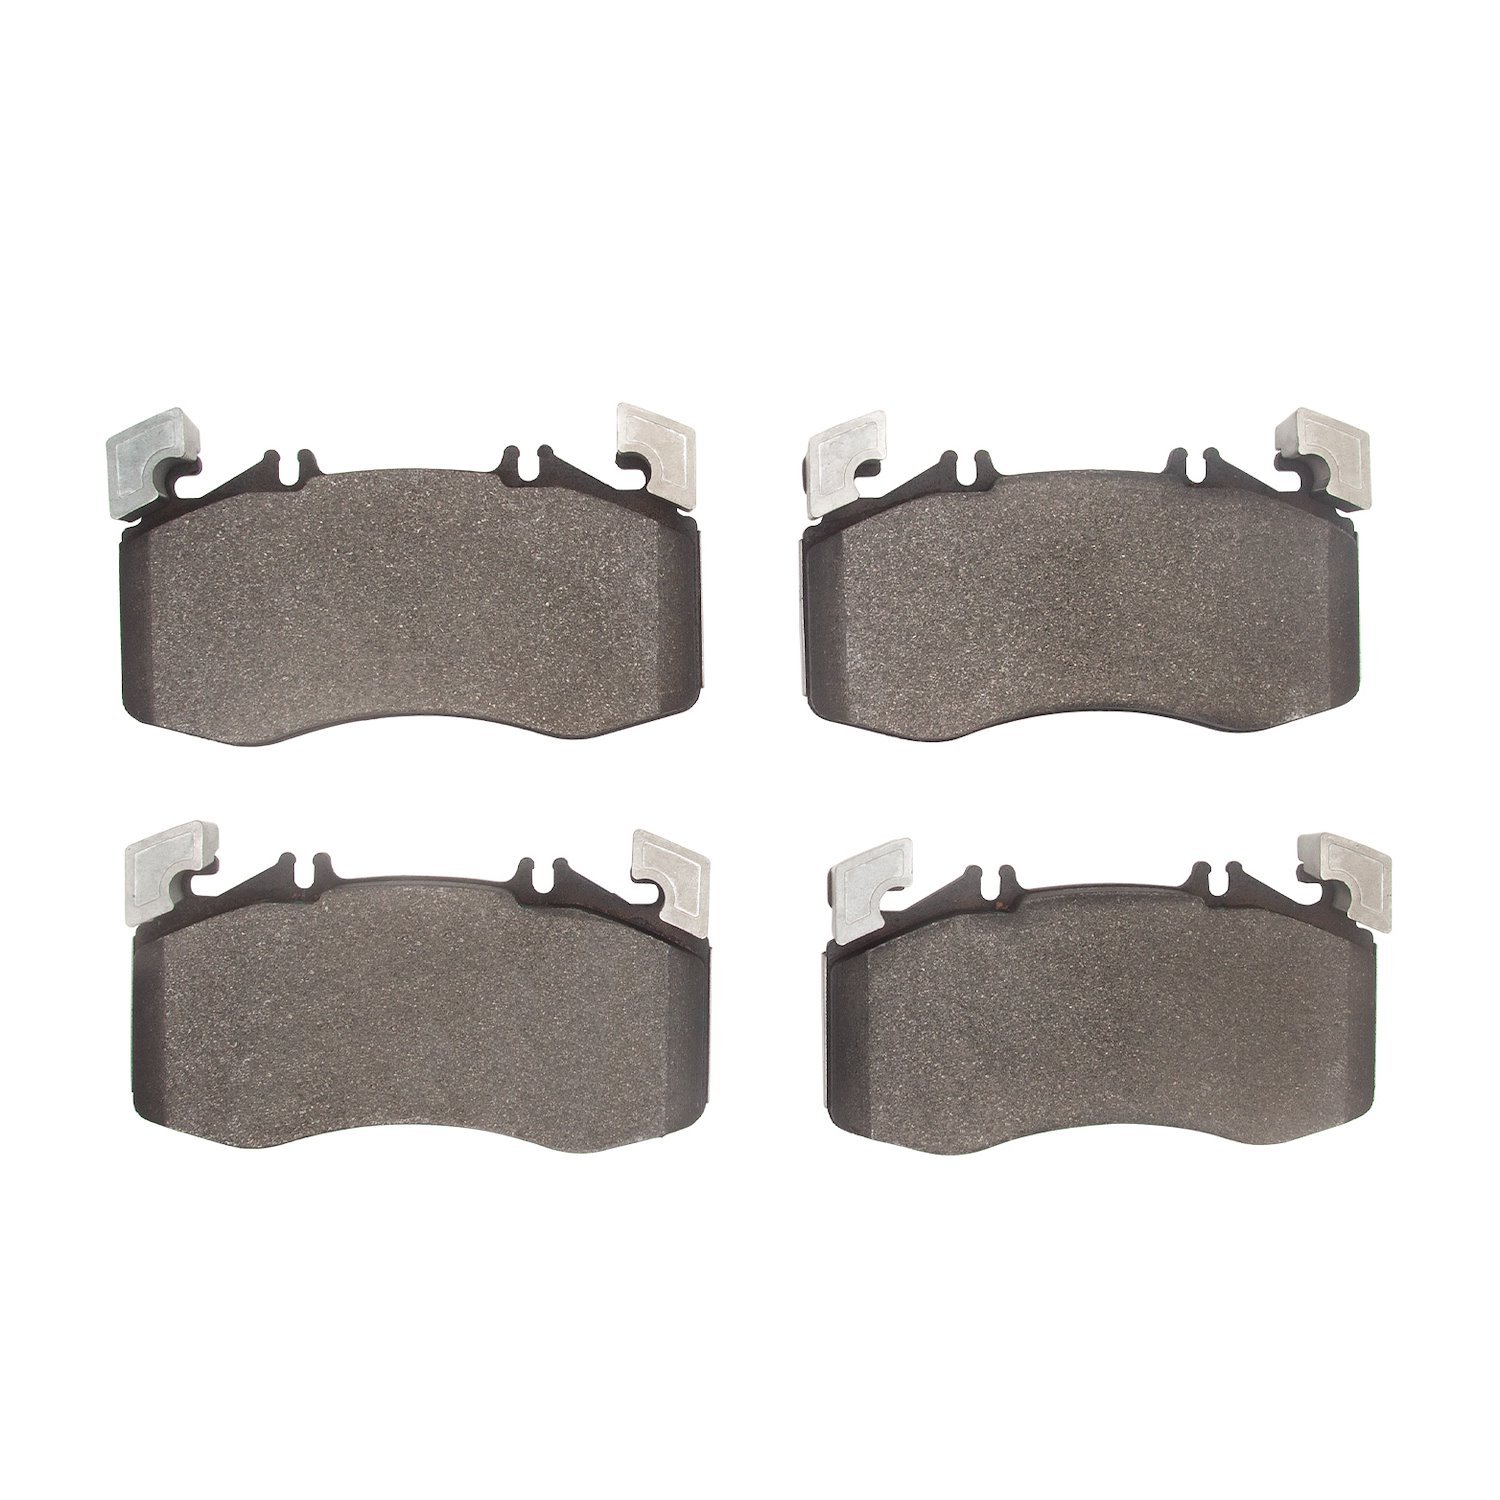 1551-2441-00 5000 Advanced Low-Metallic Brake Pads, Fits Select Mercedes-Benz, Position: Front